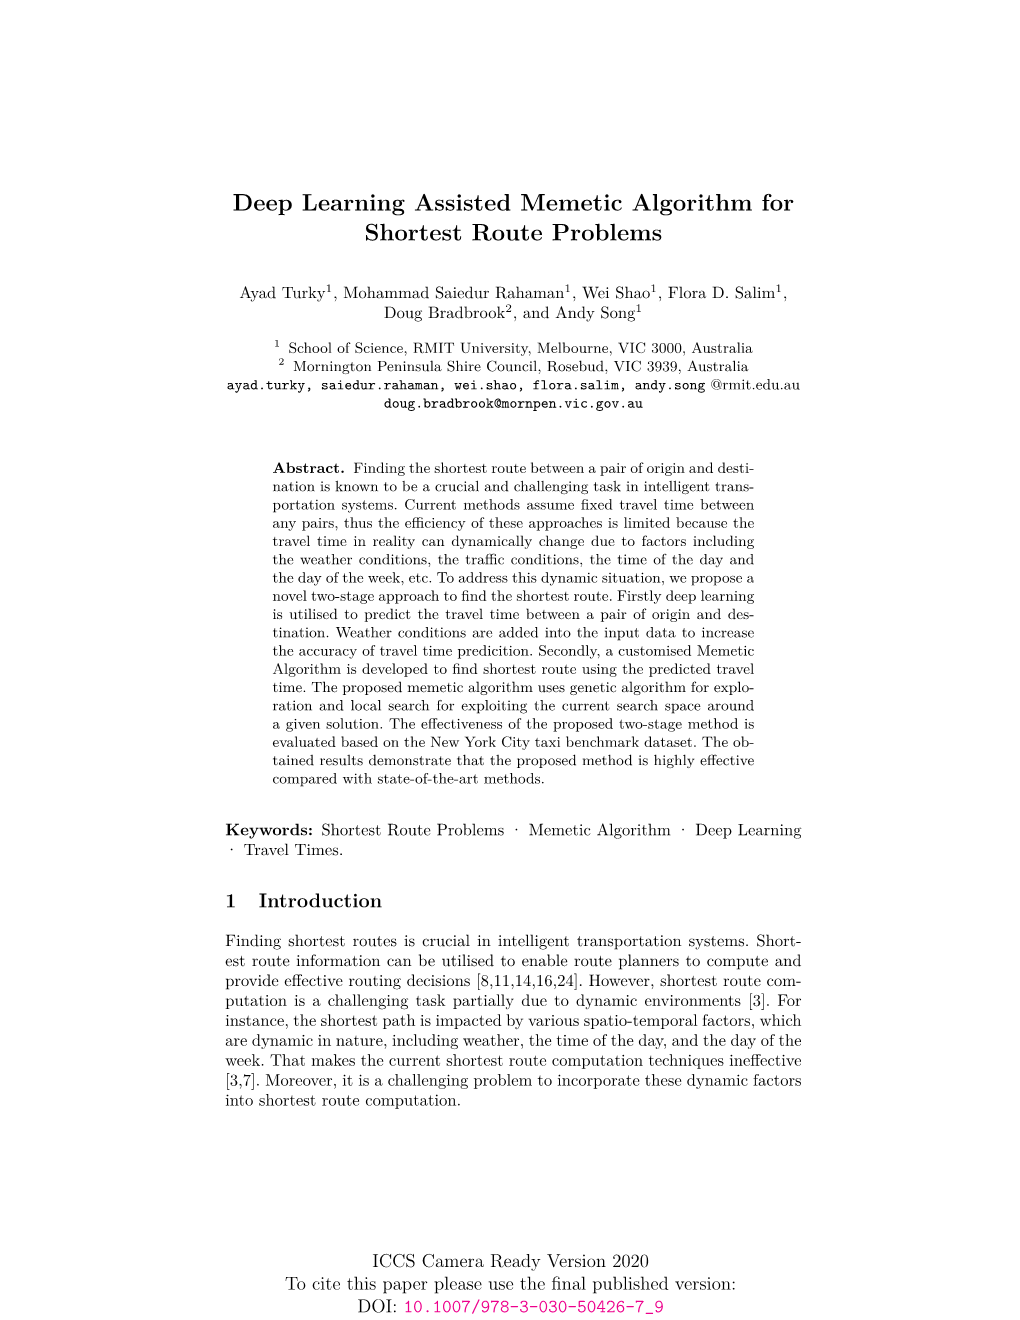 Deep Learning Assisted Memetic Algorithm for Shortest Route Problems